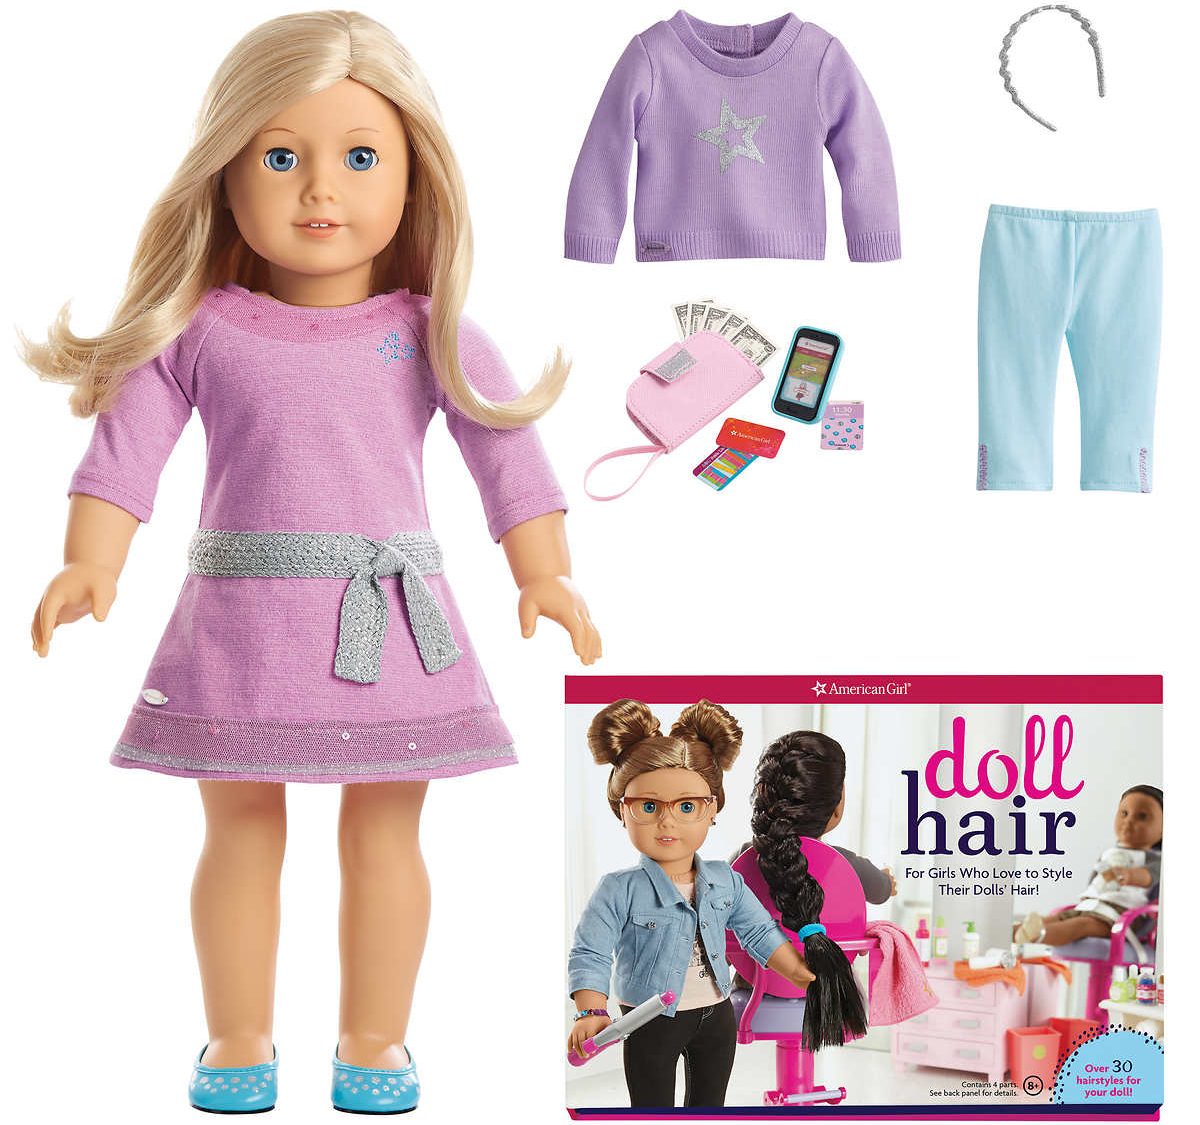 American Girl Welliewishers Doll And Accessories Sets Just 9999 On In Stock Now 